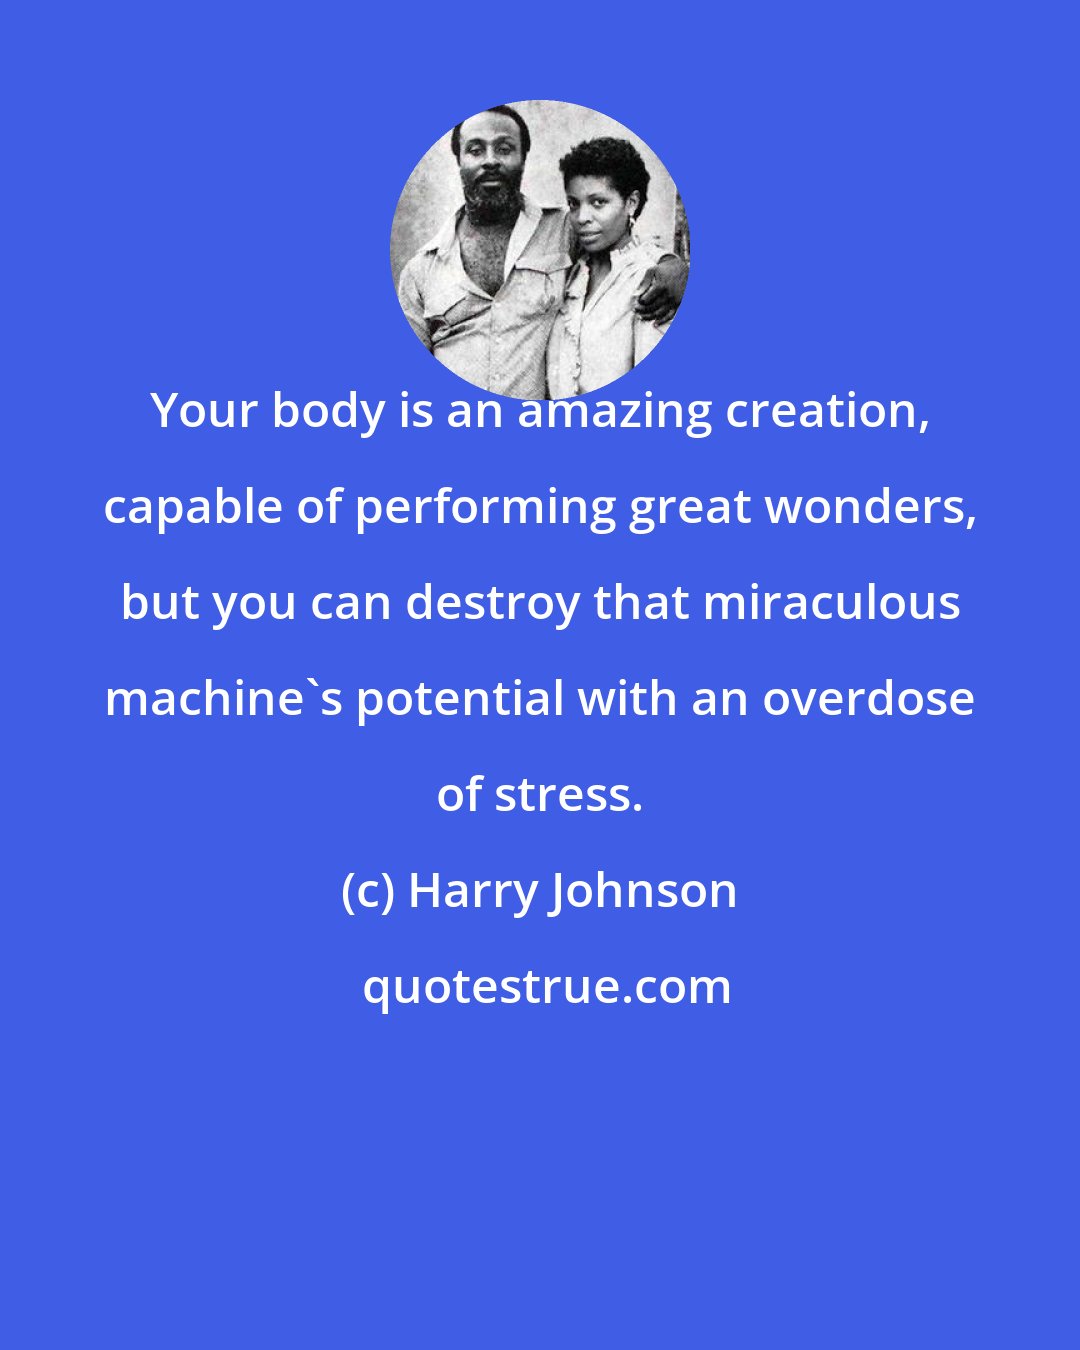 Harry Johnson: Your body is an amazing creation, capable of performing great wonders, but you can destroy that miraculous machine's potential with an overdose of stress.